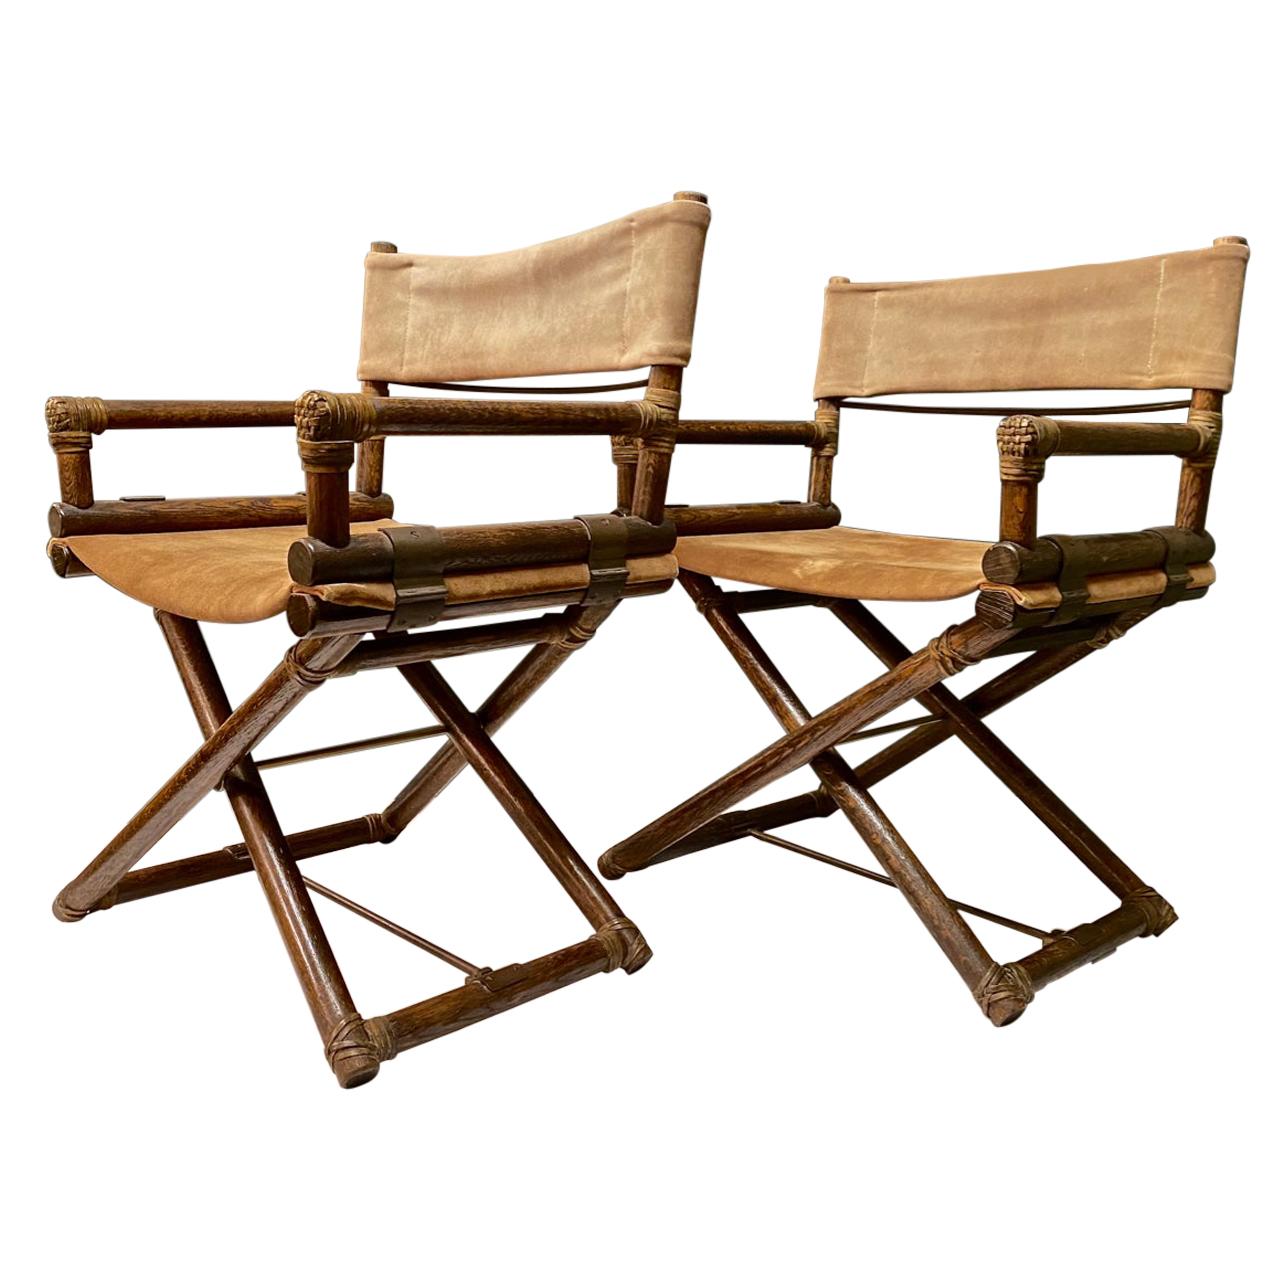 Pair of McGuire Directors Chairs